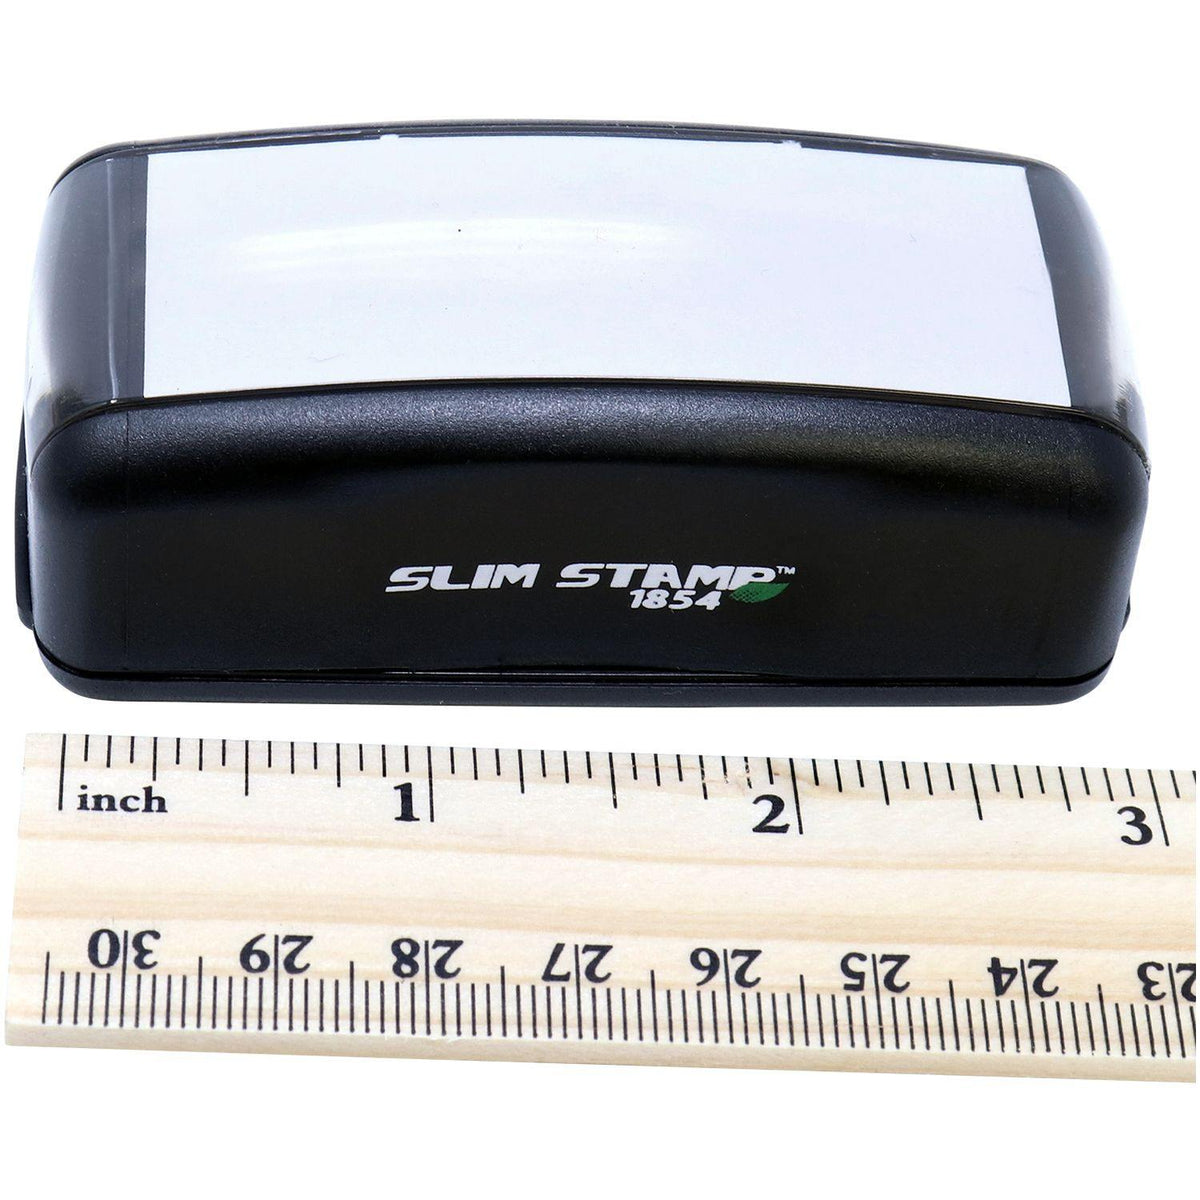 Measurement Large Pre Inked Vehicle Loans Stamp with Ruler